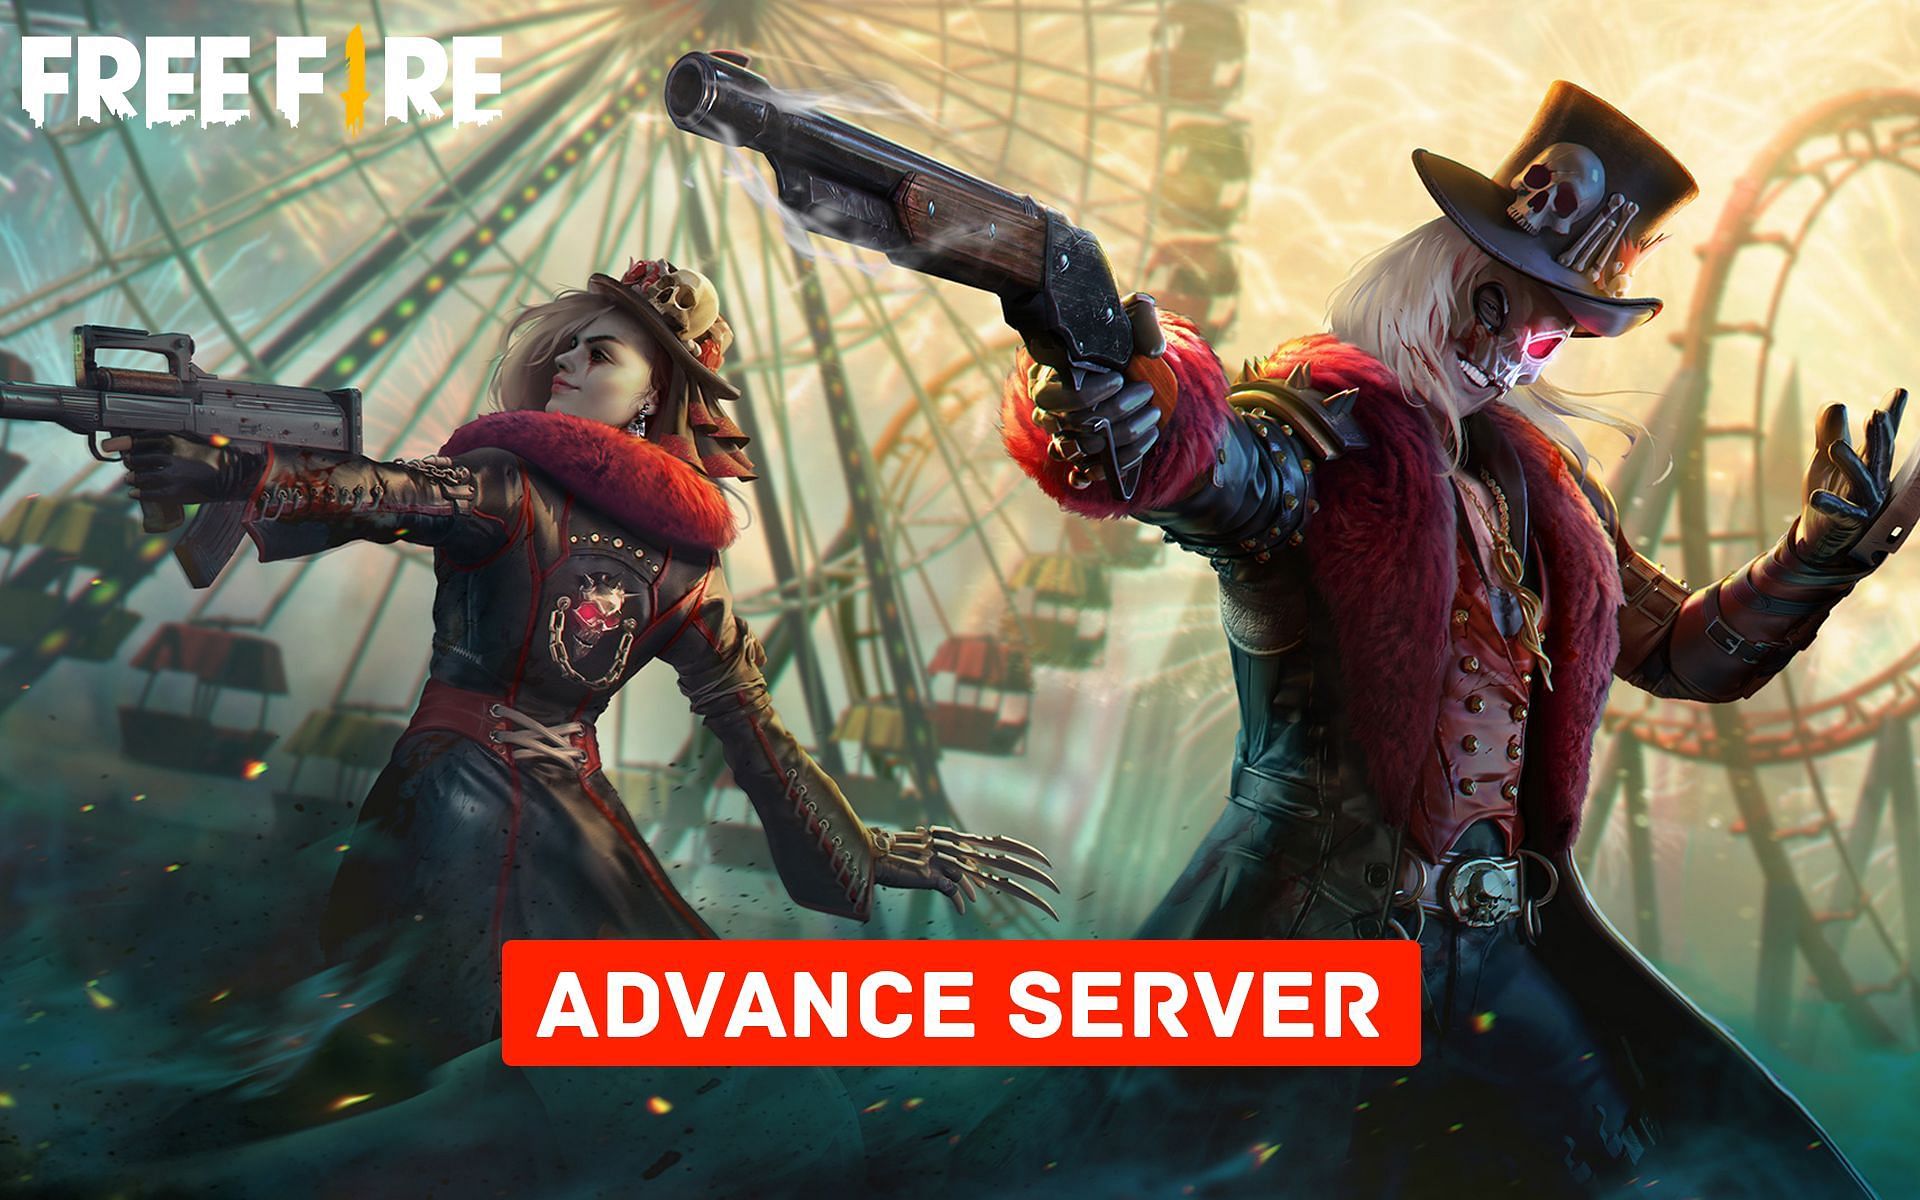 Advance Server provides a chance to test out upcoming features (Image via Sportskeeda)